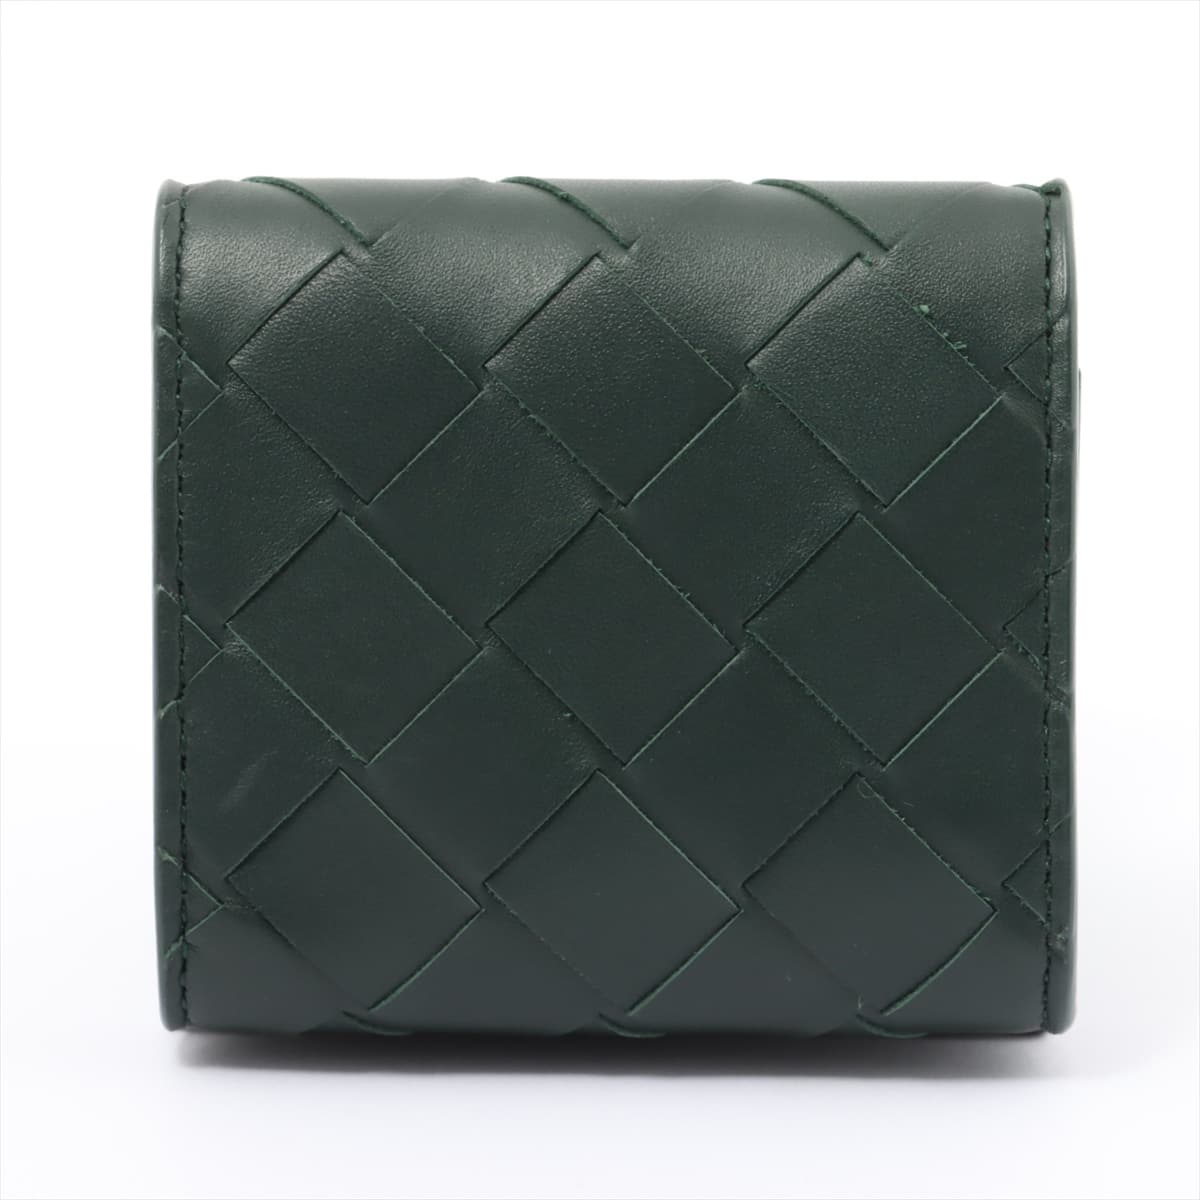 Bottega Veneta Intrecciato Leather Coin case Green There is a smell of all the threads